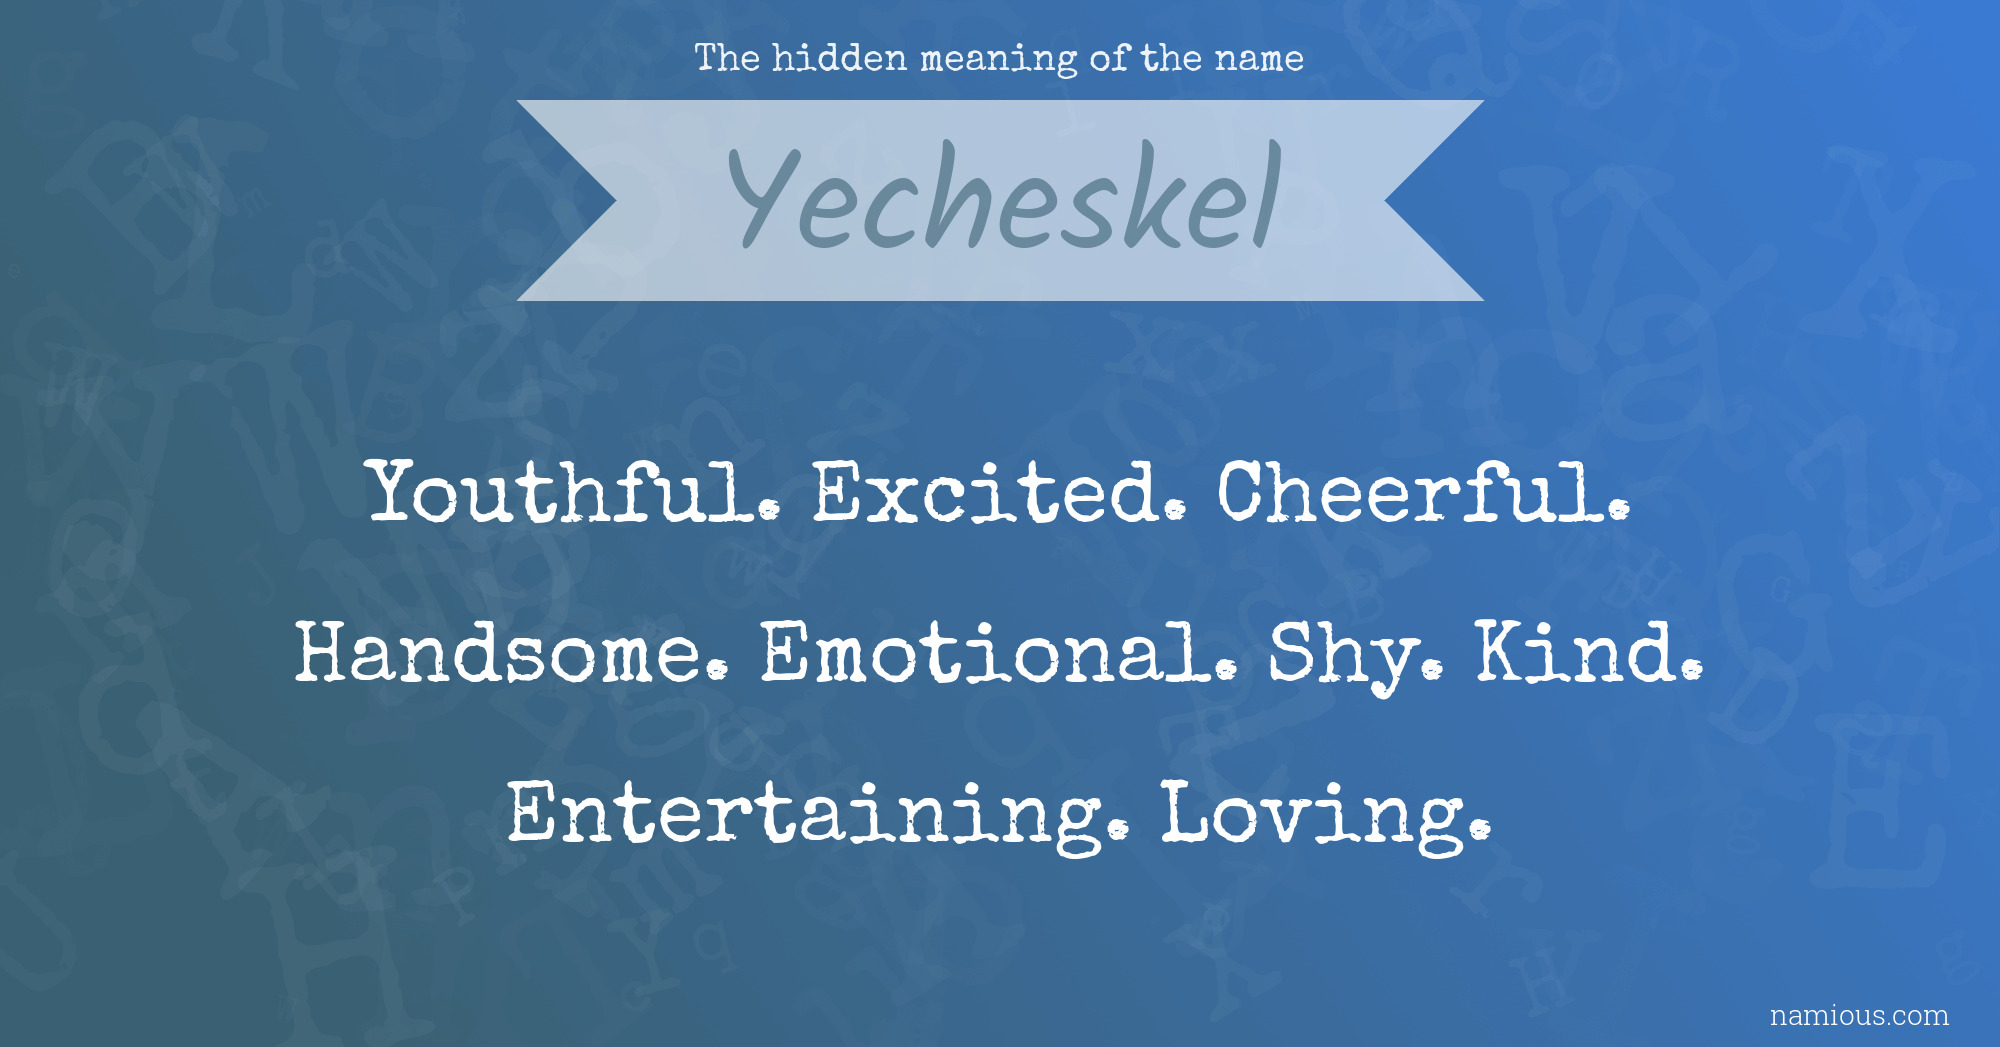 The hidden meaning of the name Yecheskel